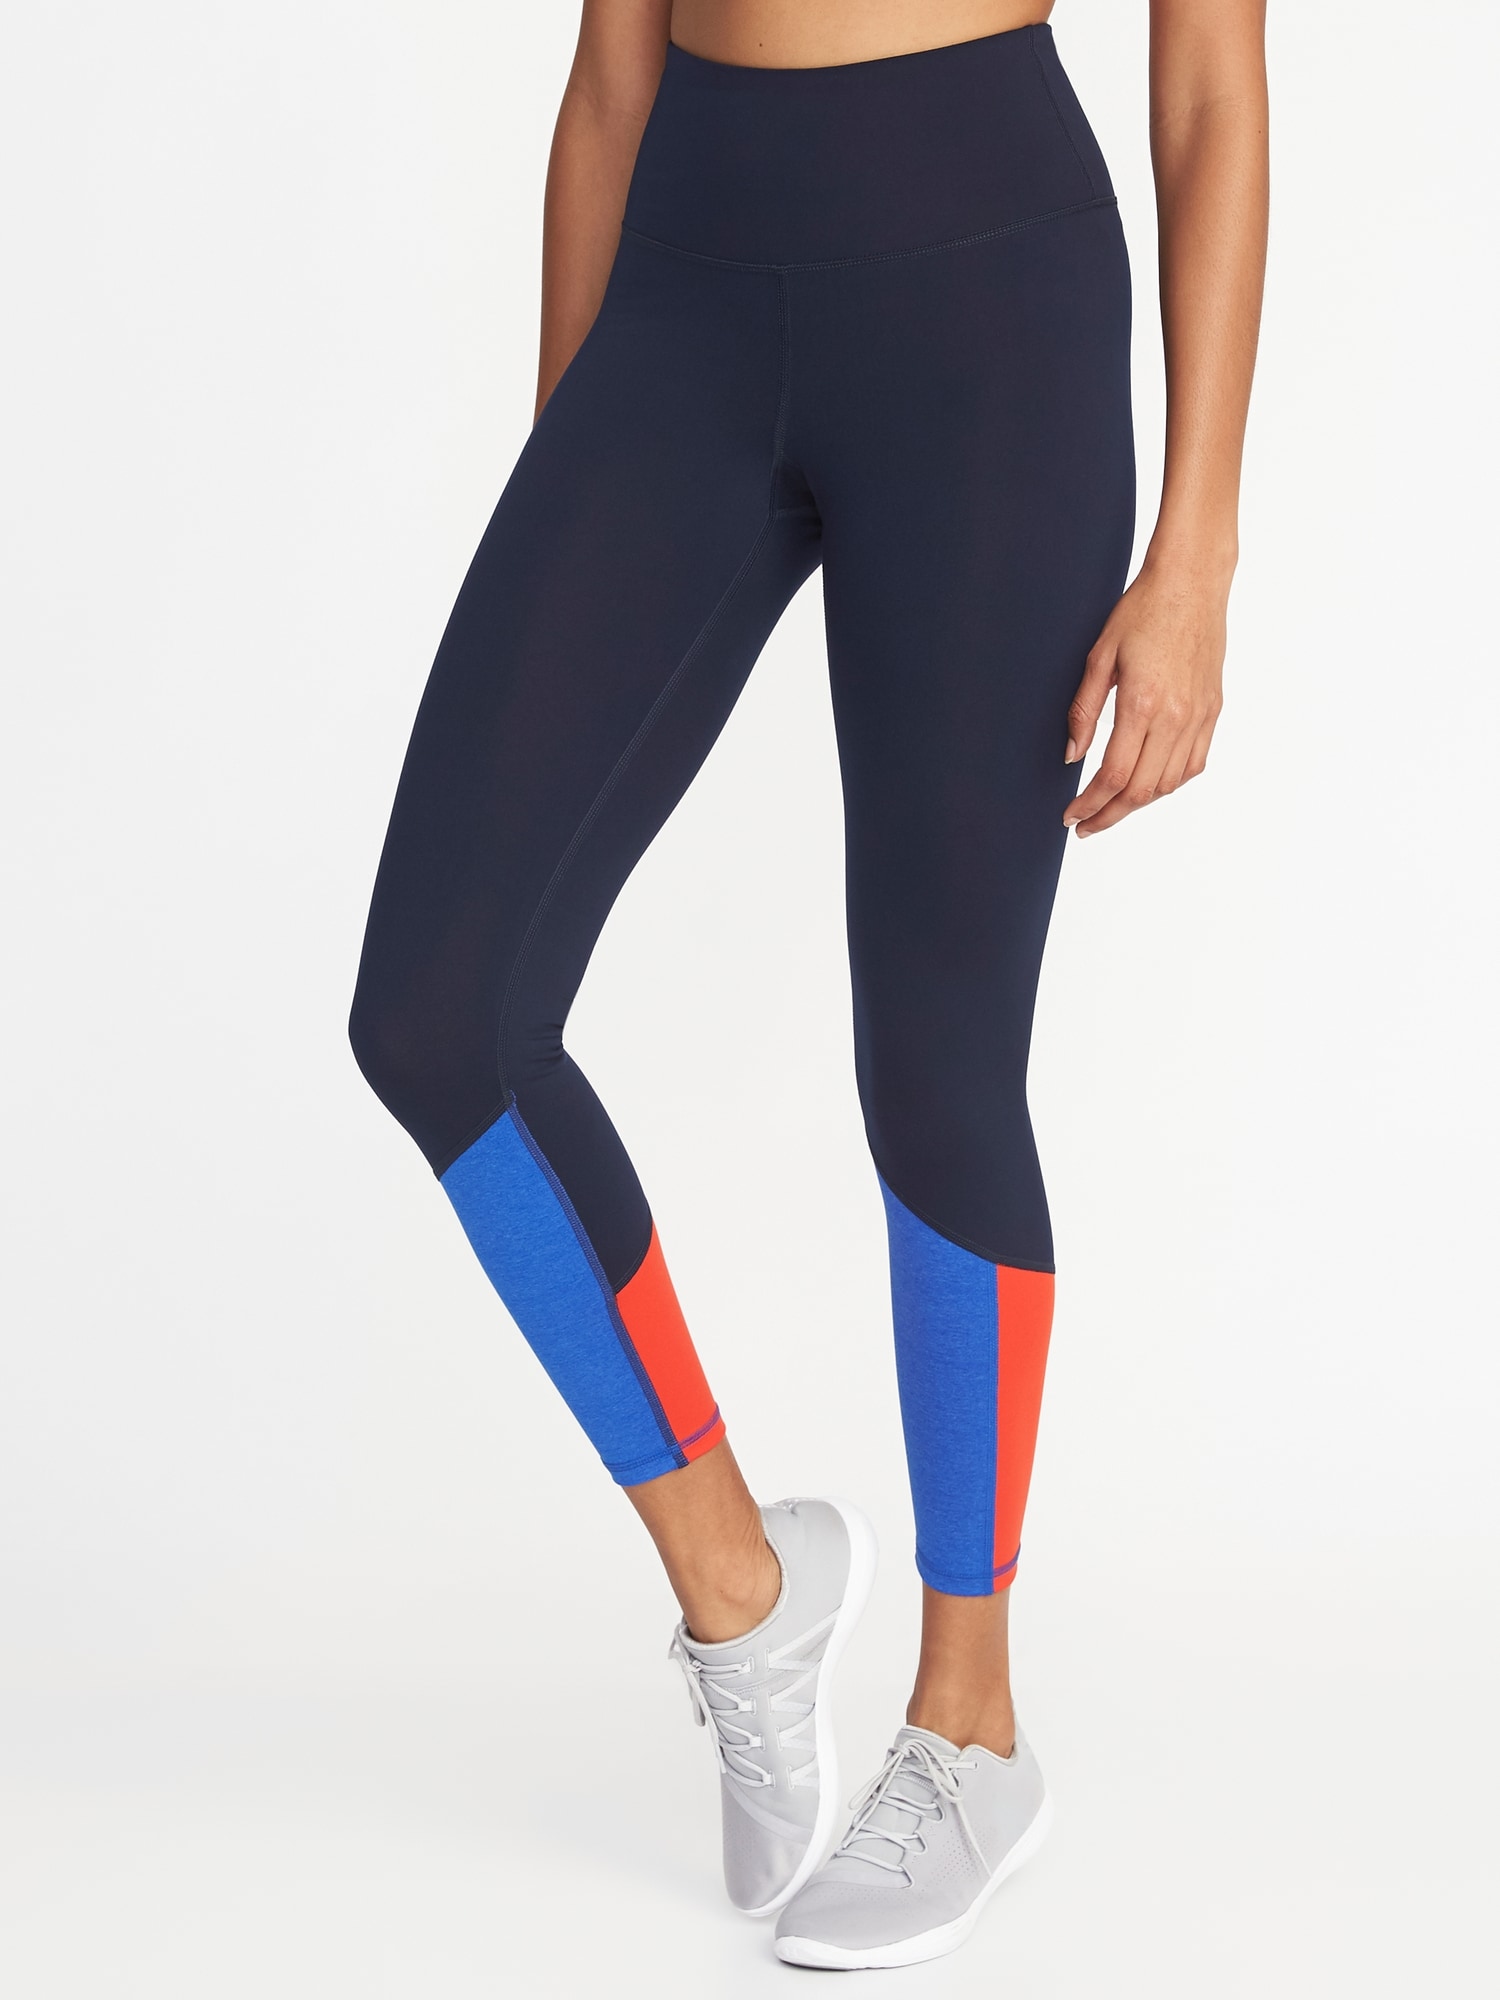 High-Waisted 7/8-Length Color-Block Compression Leggings For Women